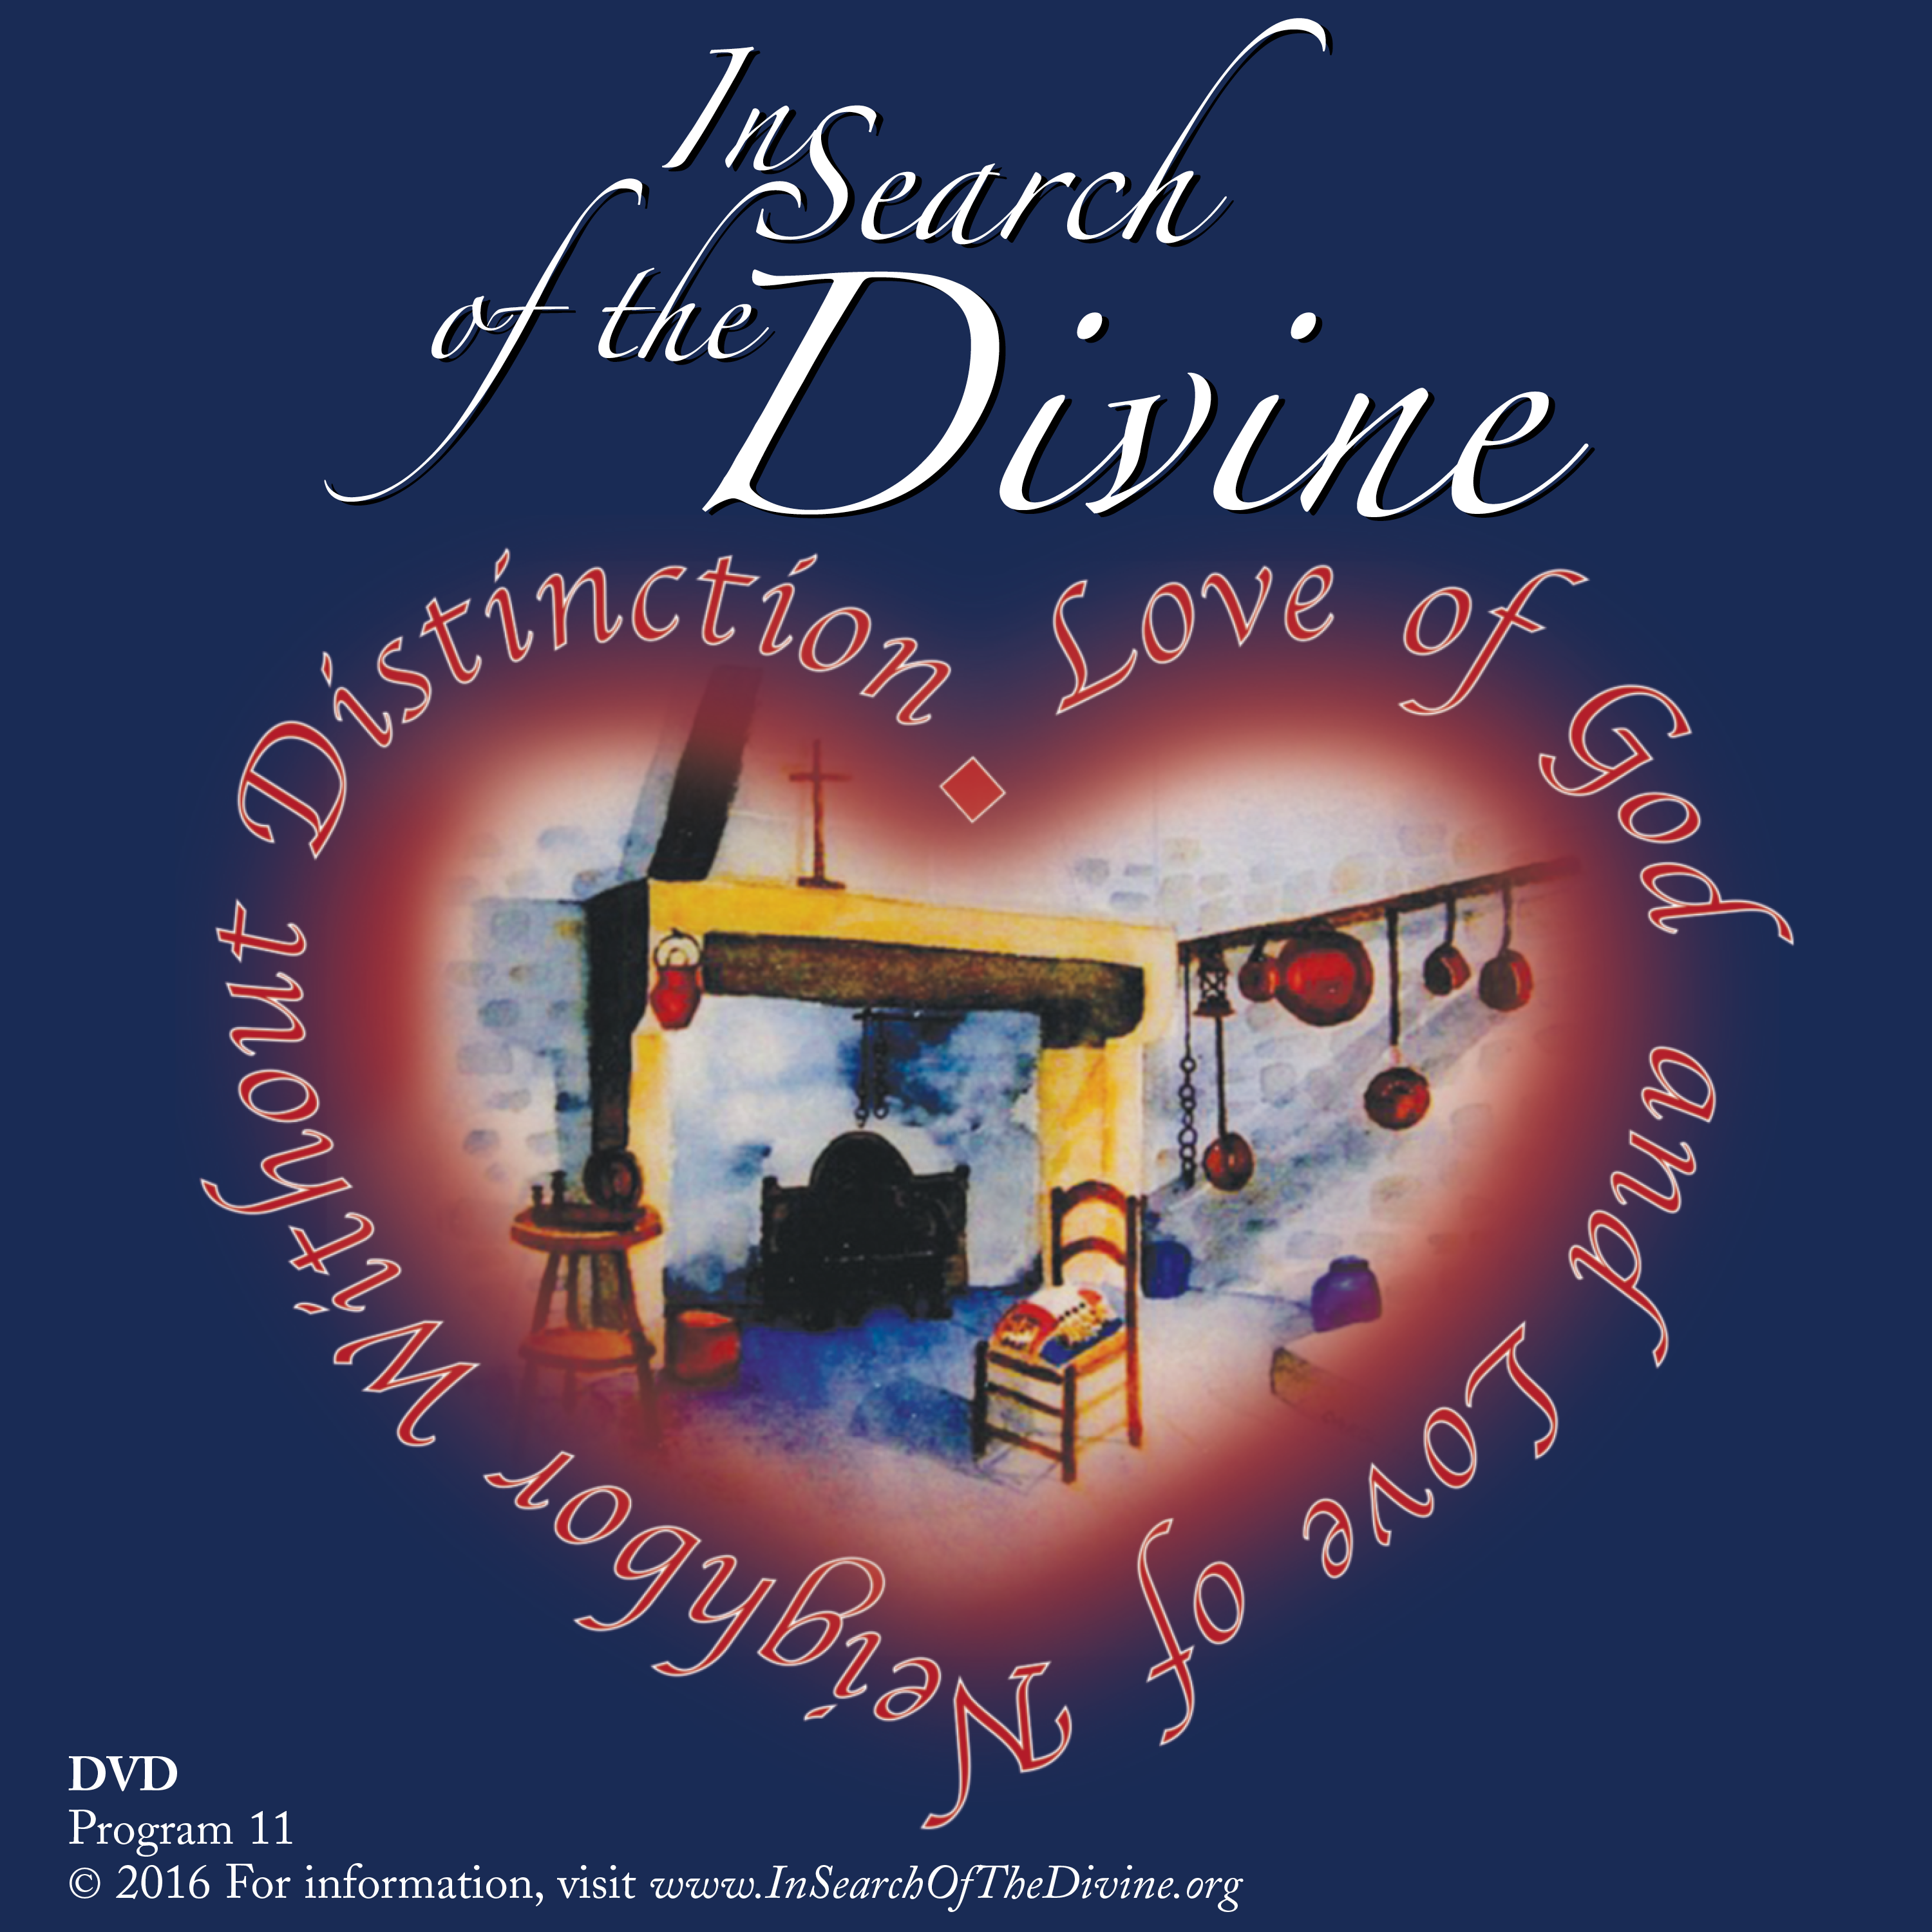 In Search of the Divine - DVD #11